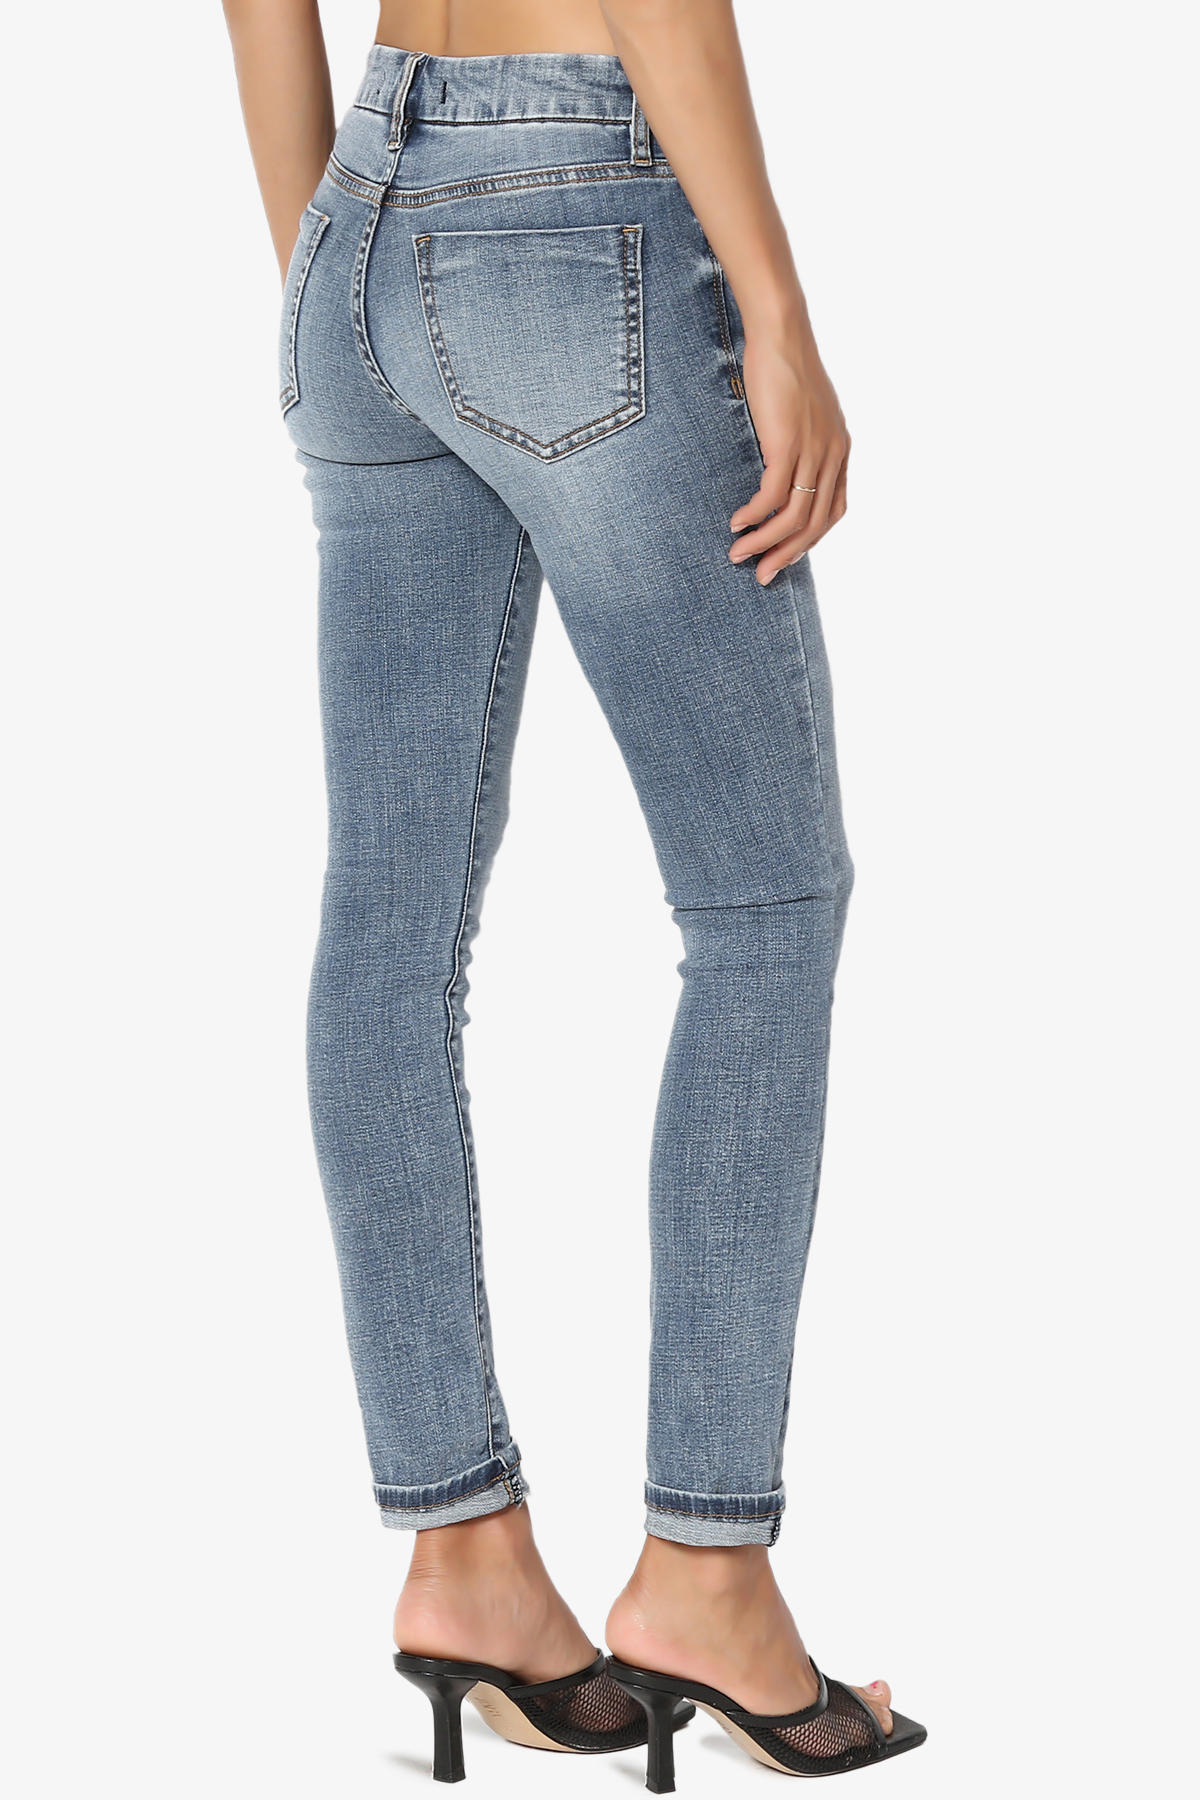 TheMogan Women's 0~3X Roll Up Mid Rise Med Vintage Wash Tencel Denim Skinny Jeans - image 4 of 7